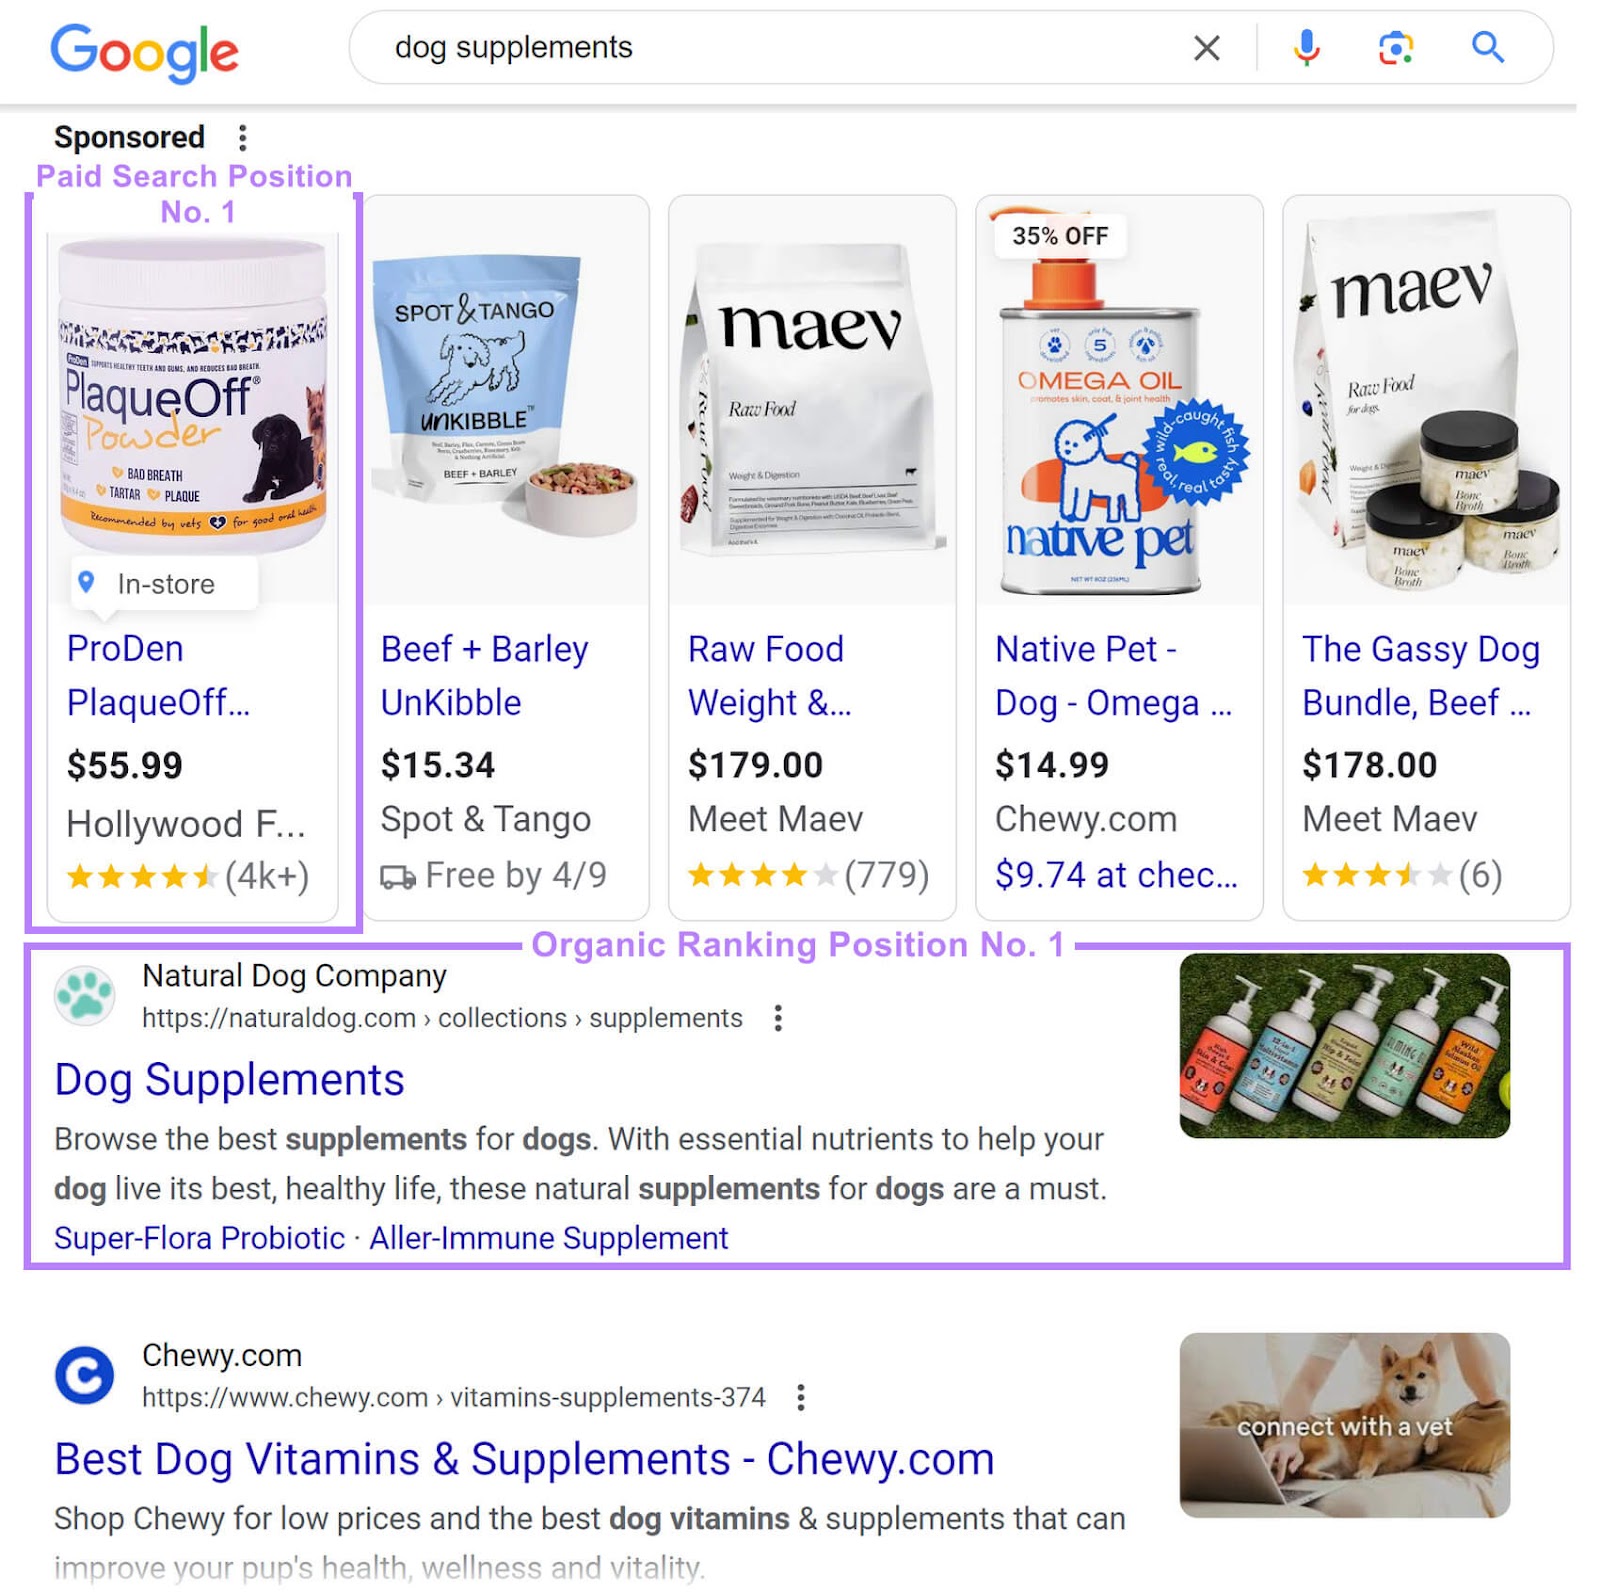 Hollywood Feed has the No. 1 paid hunt  presumption   with PPC ad, and Natural Dog Company has the No. 1 integrated  ranking presumption   for "dog supplements"